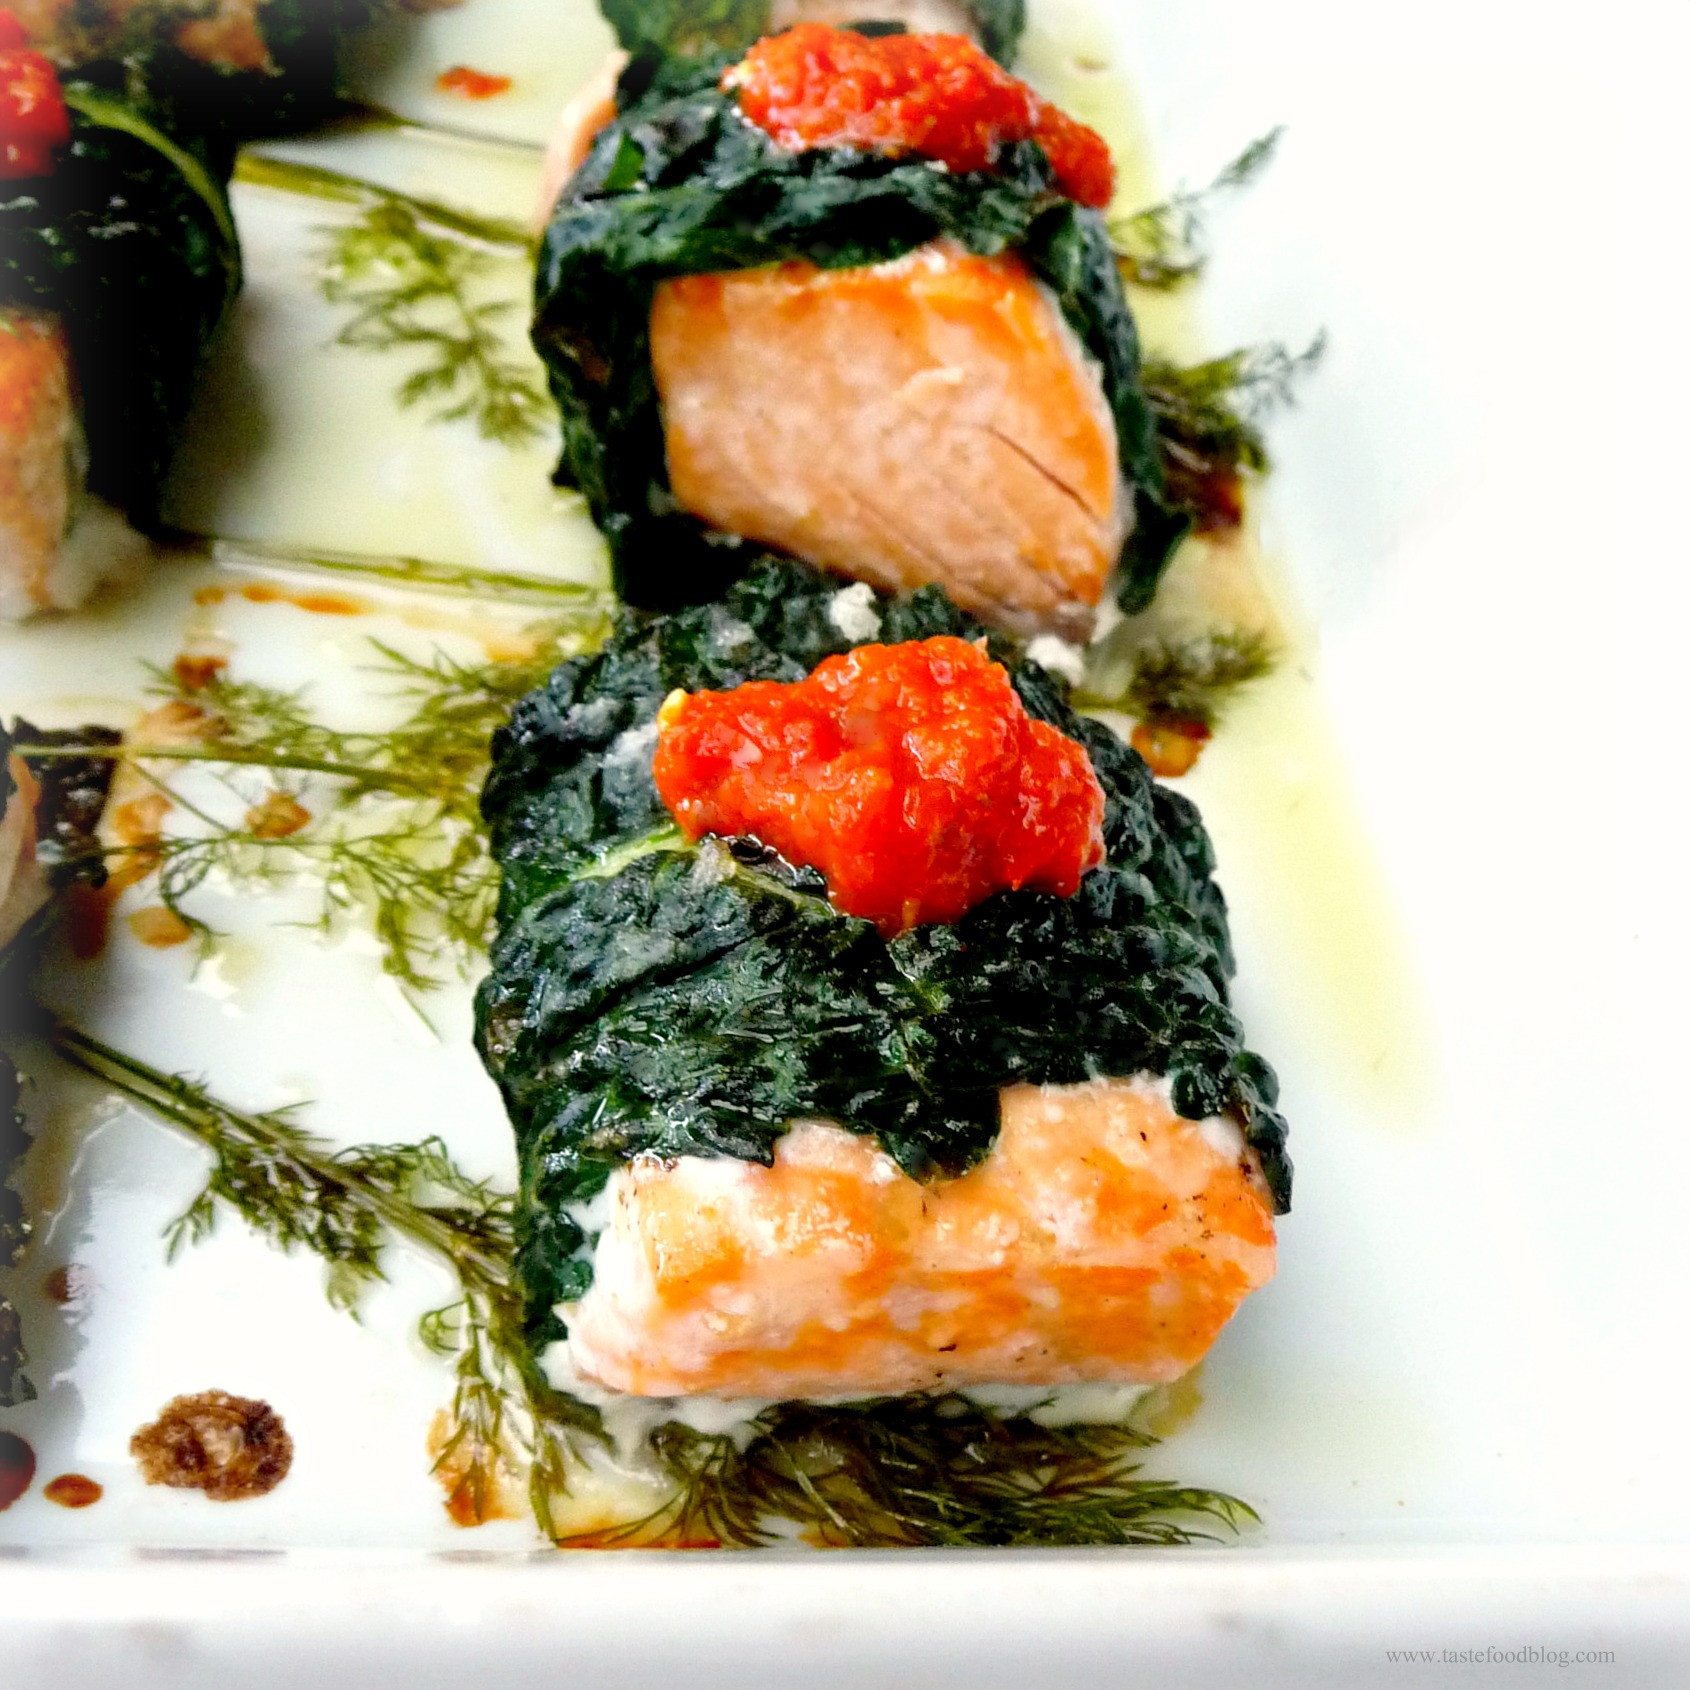 Salmon And Kale Recipes
 Salmon Wrapped in Kale Leaves with Harissa – TasteFood